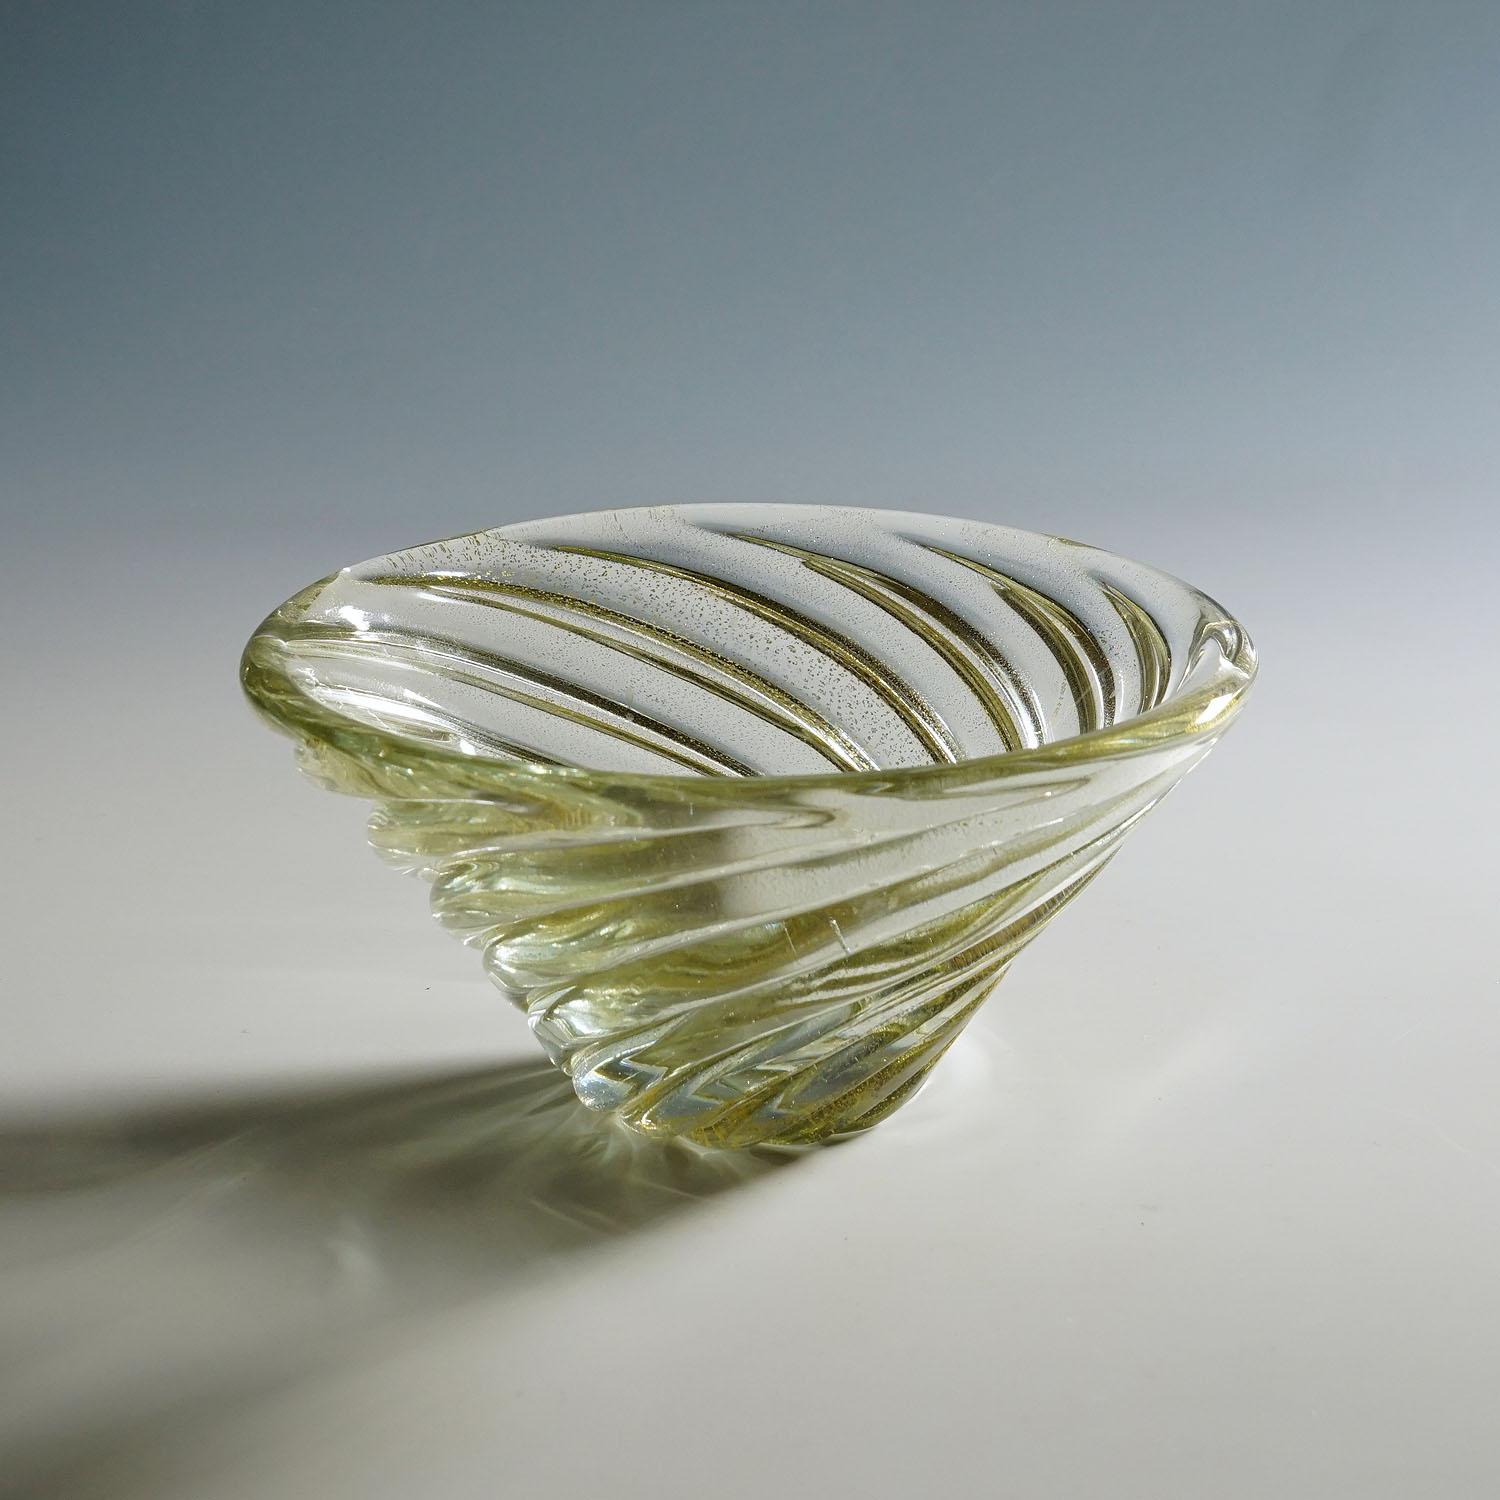 Venini Art Glass Bowl 'Diamante' by Paolo Venini, Murano 1930s

A rare Venini art glass bowl of the 'Diamante' series. Heavy transparent glass with a gold leave inclusion free formed with a turned ribbing. Designed by Paolo Venini in 1934 and